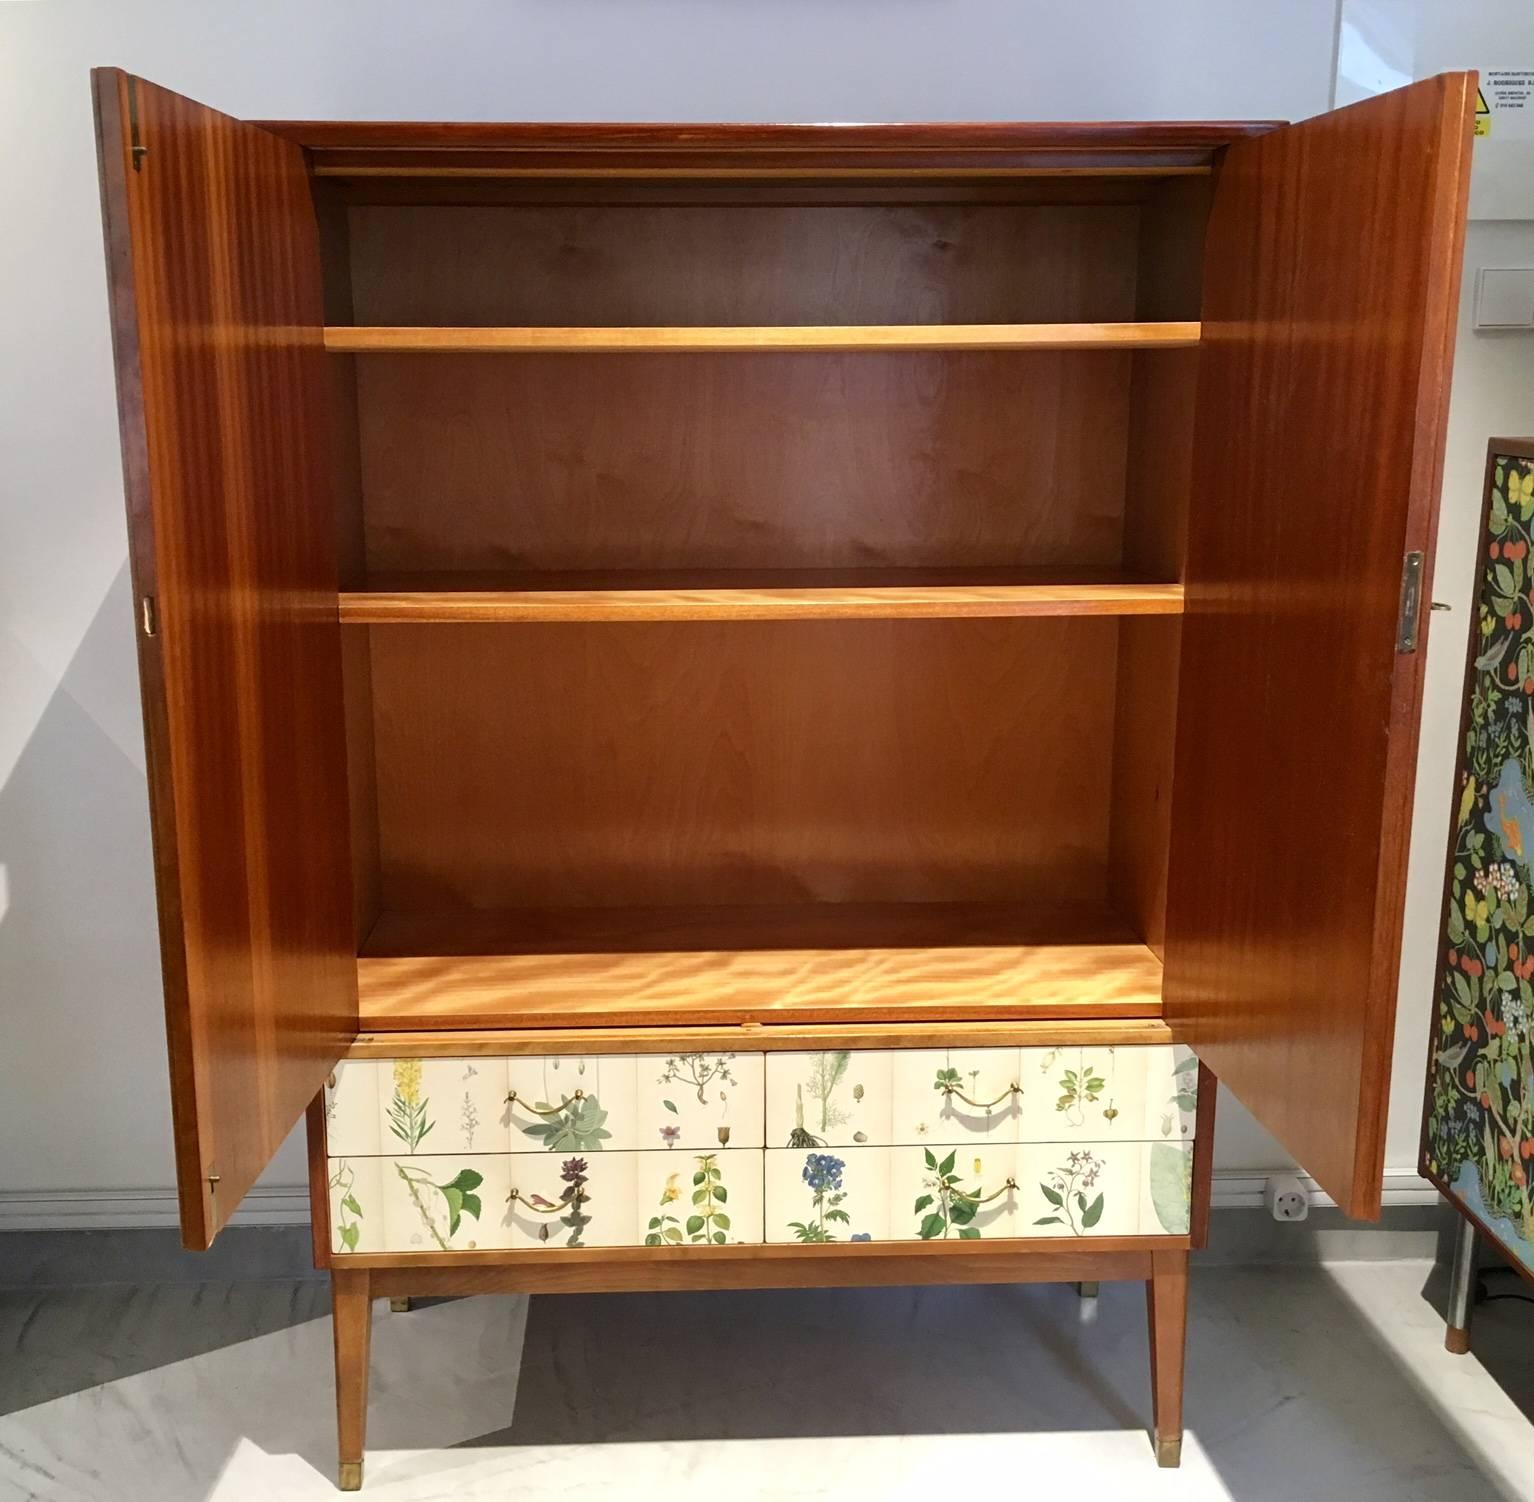 Tall Wooden Cabinet with Nordens Flora Illustrations by C.A. Lindman 1